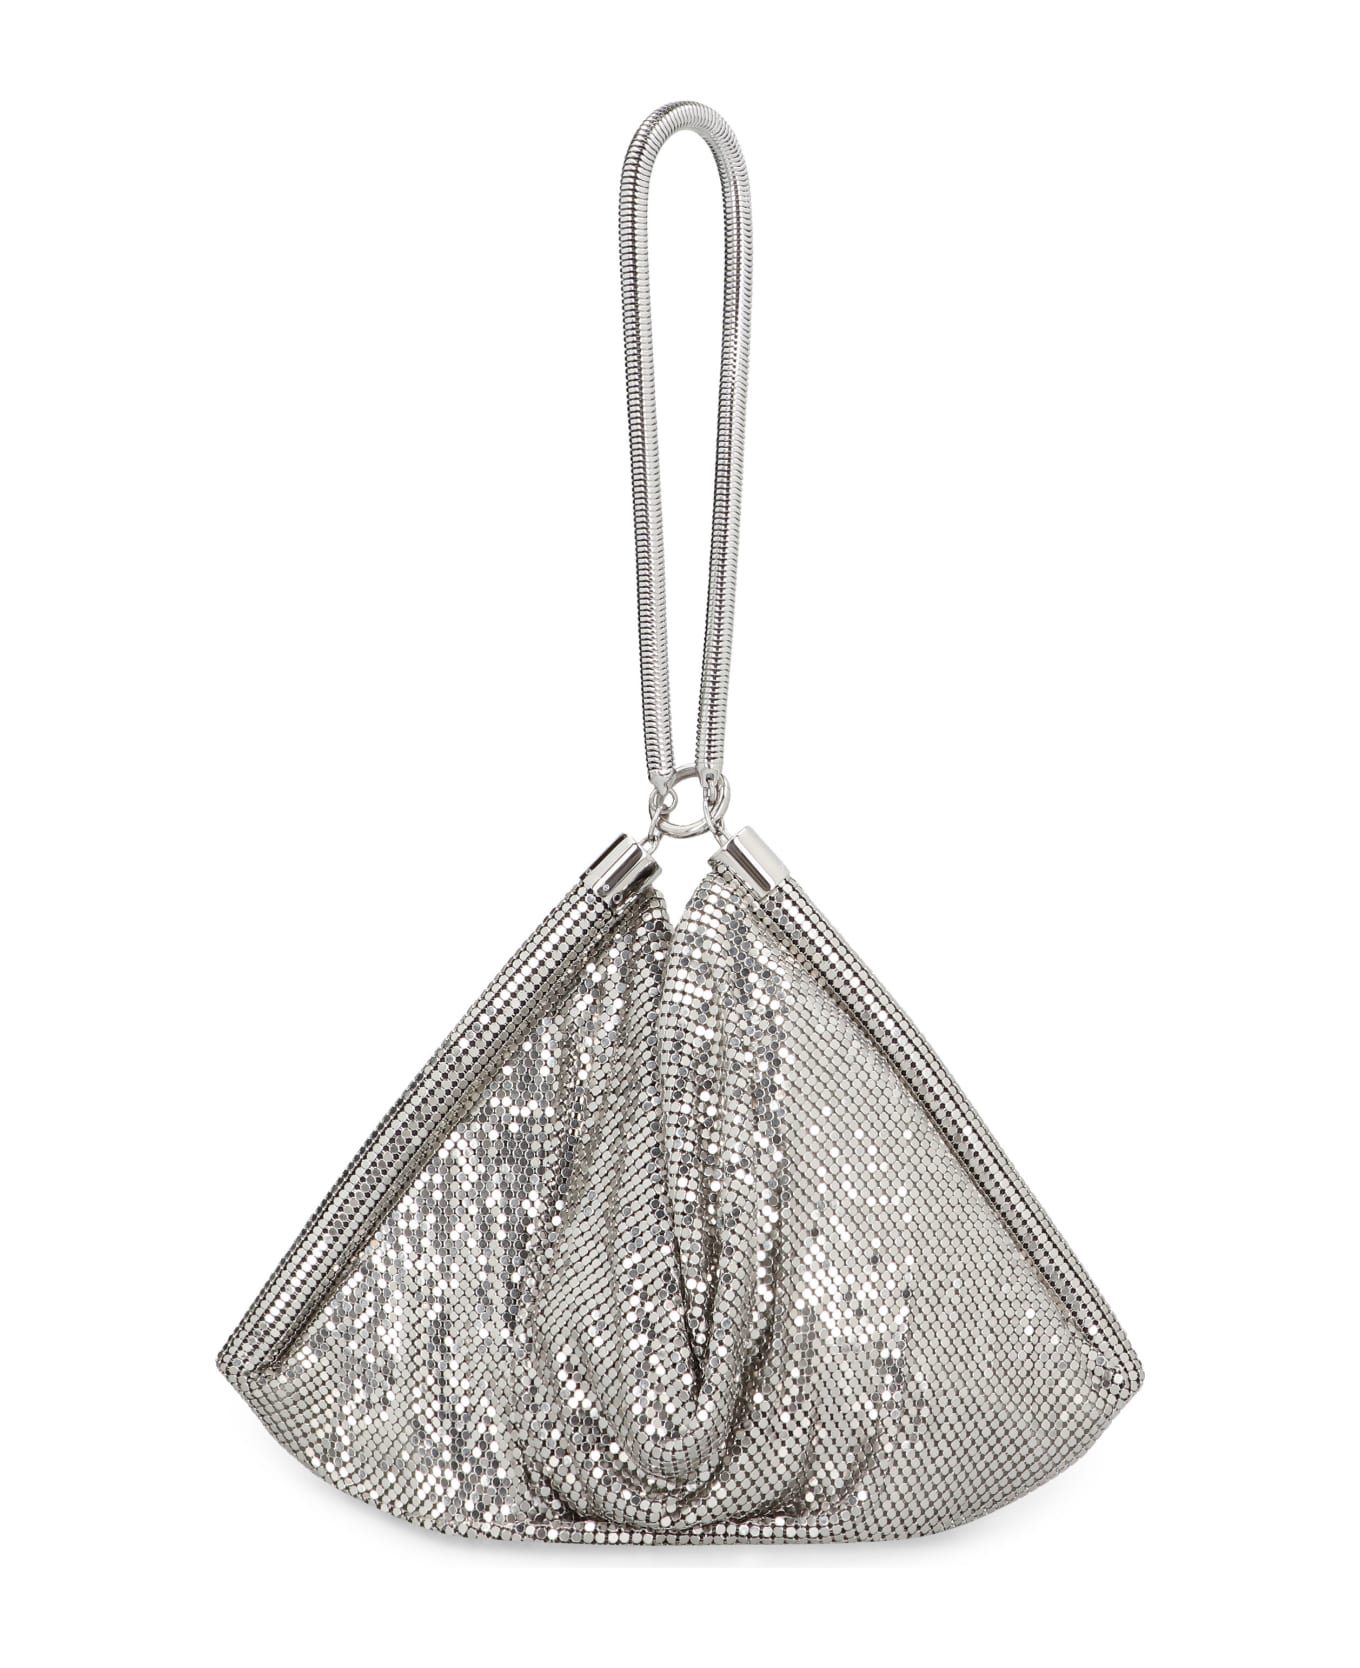 Paco Rabanne Chainmail Pocket Bag - Argento